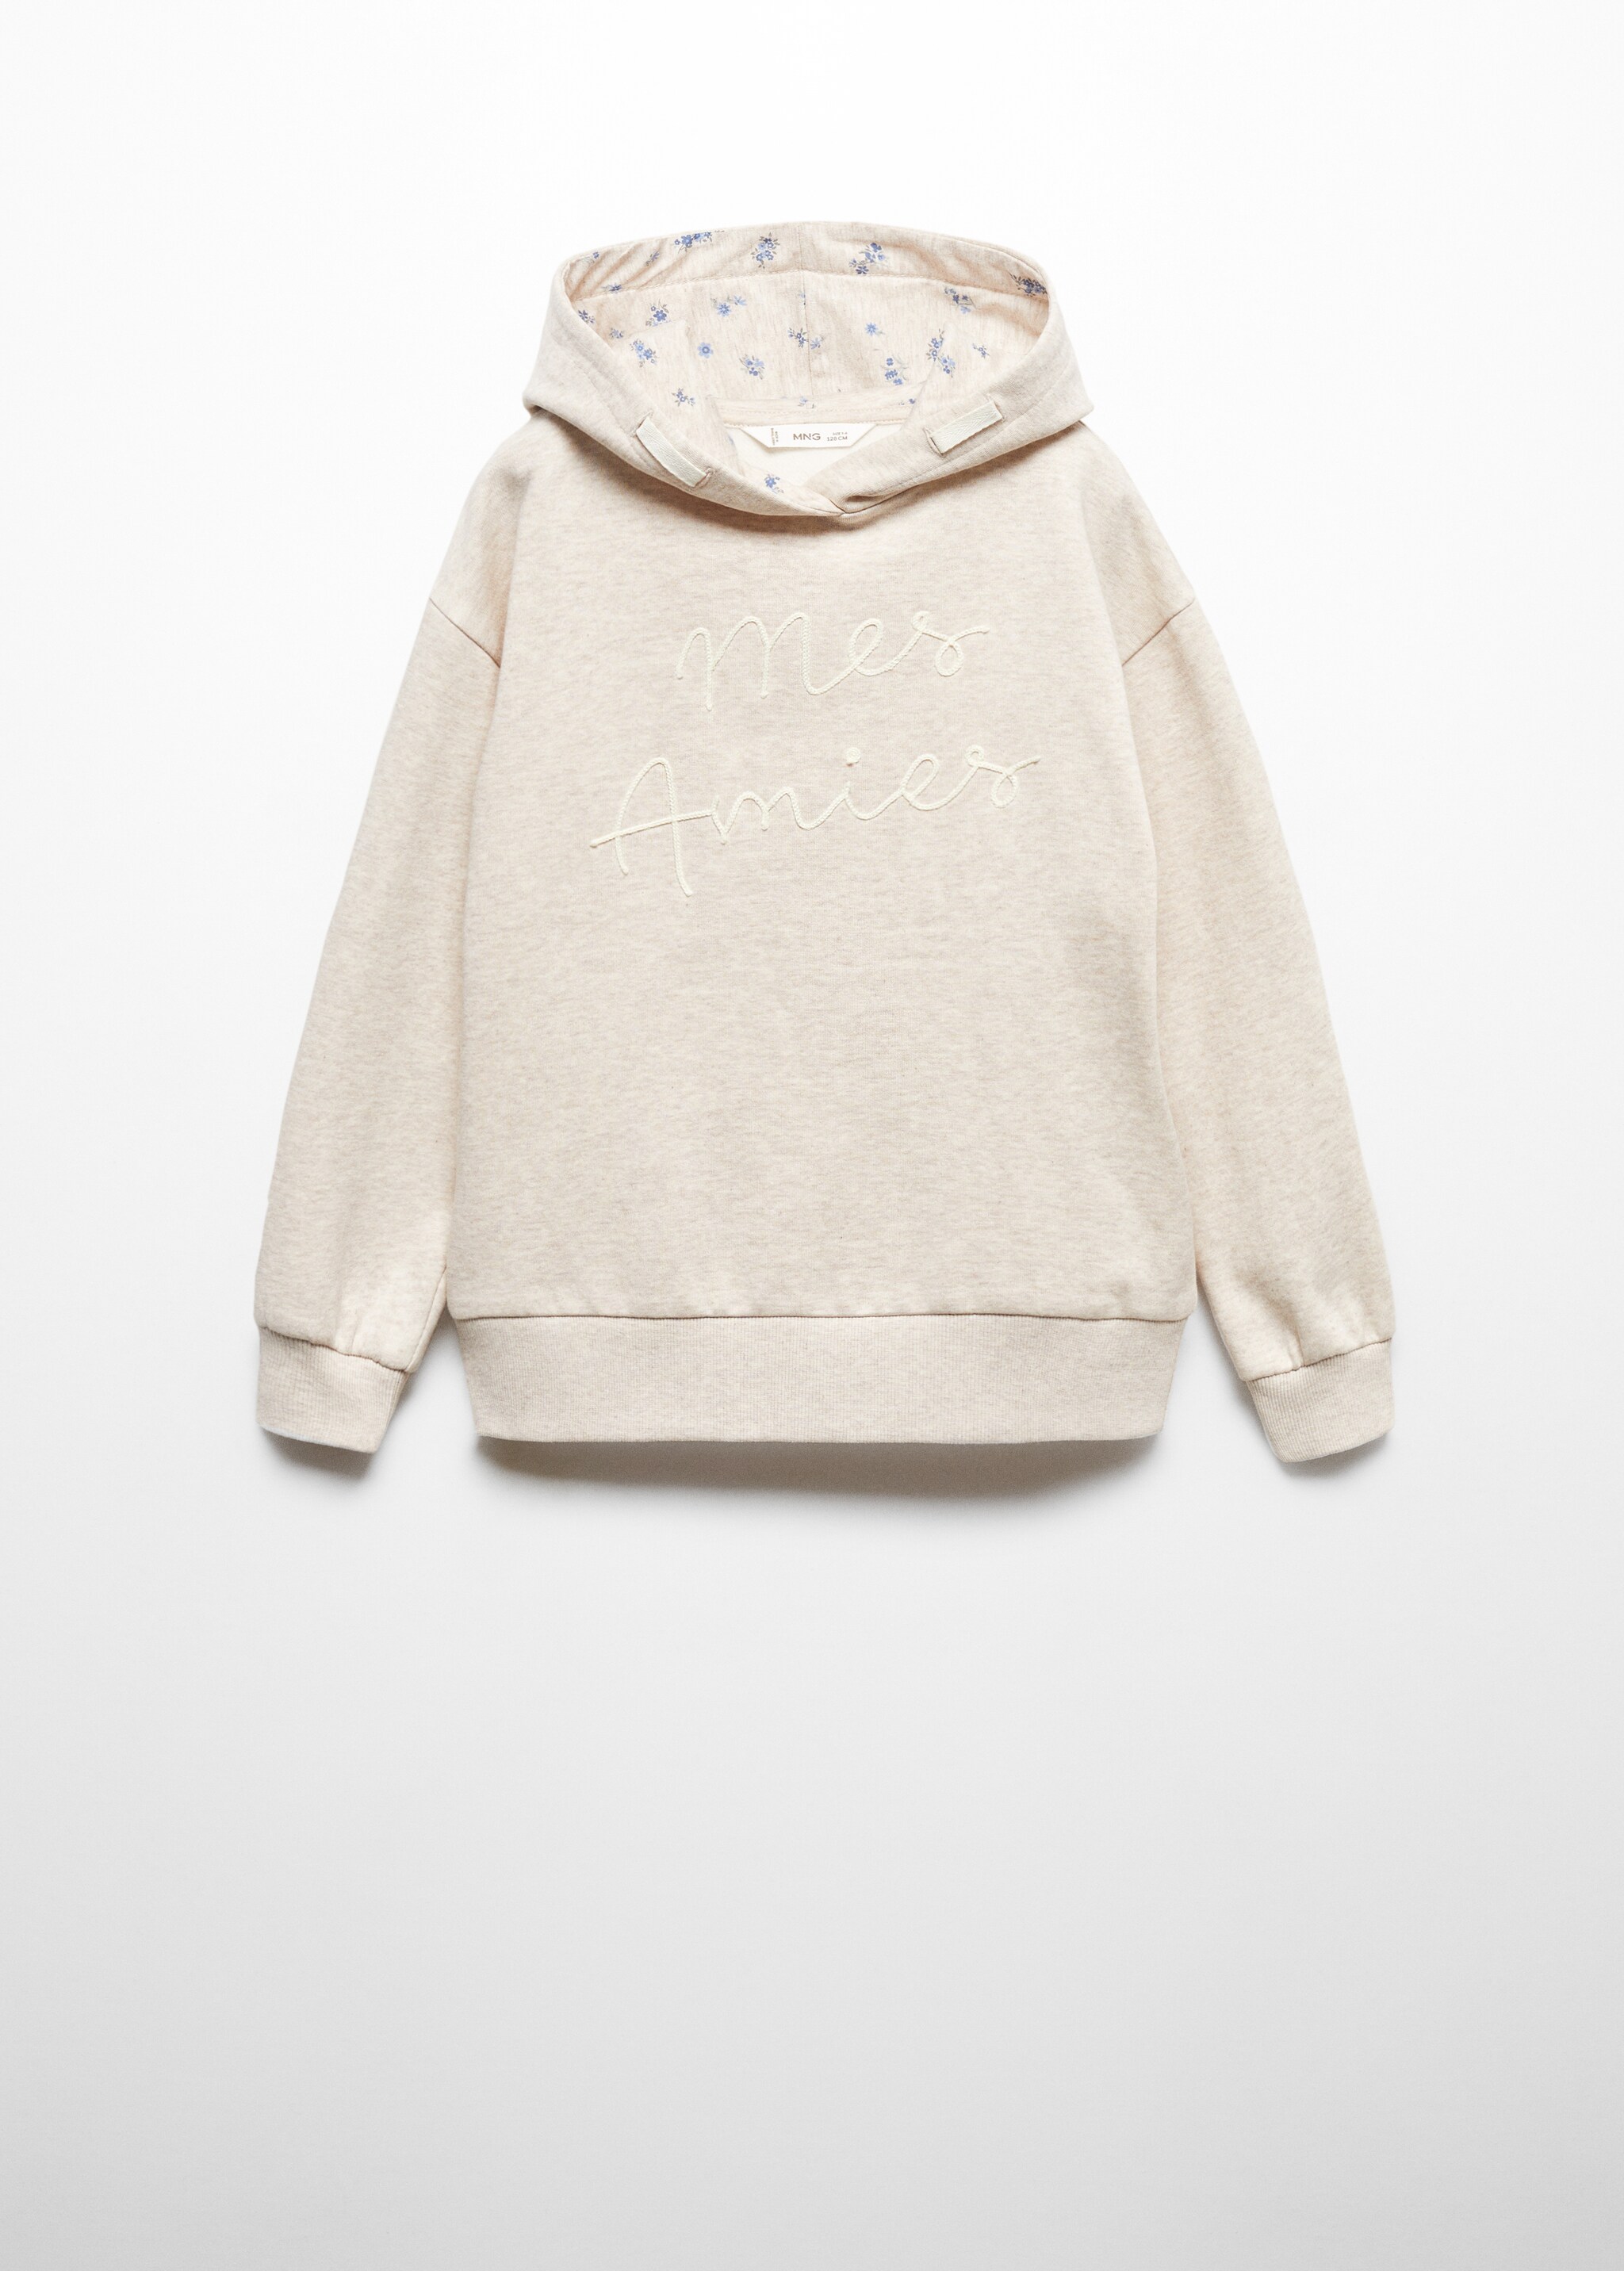 Embroidered message sweatshirt - Article without model